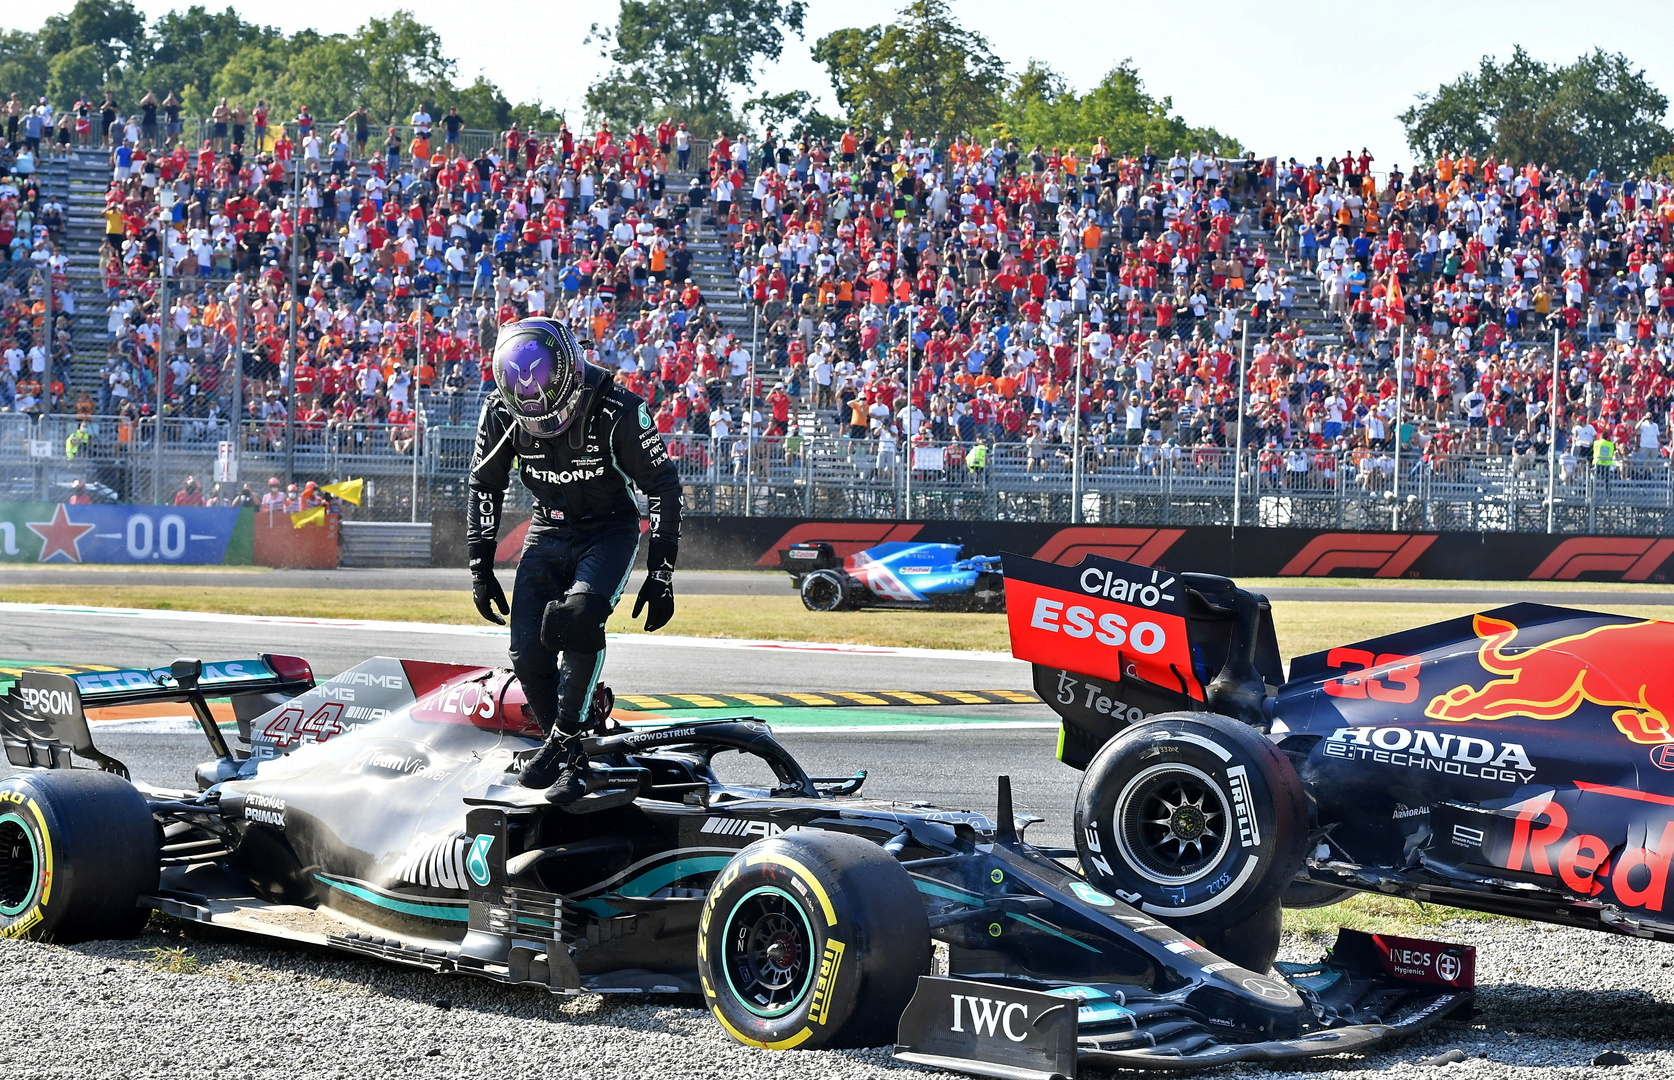 A survey reveals the lover of fans in Formula 1 teams